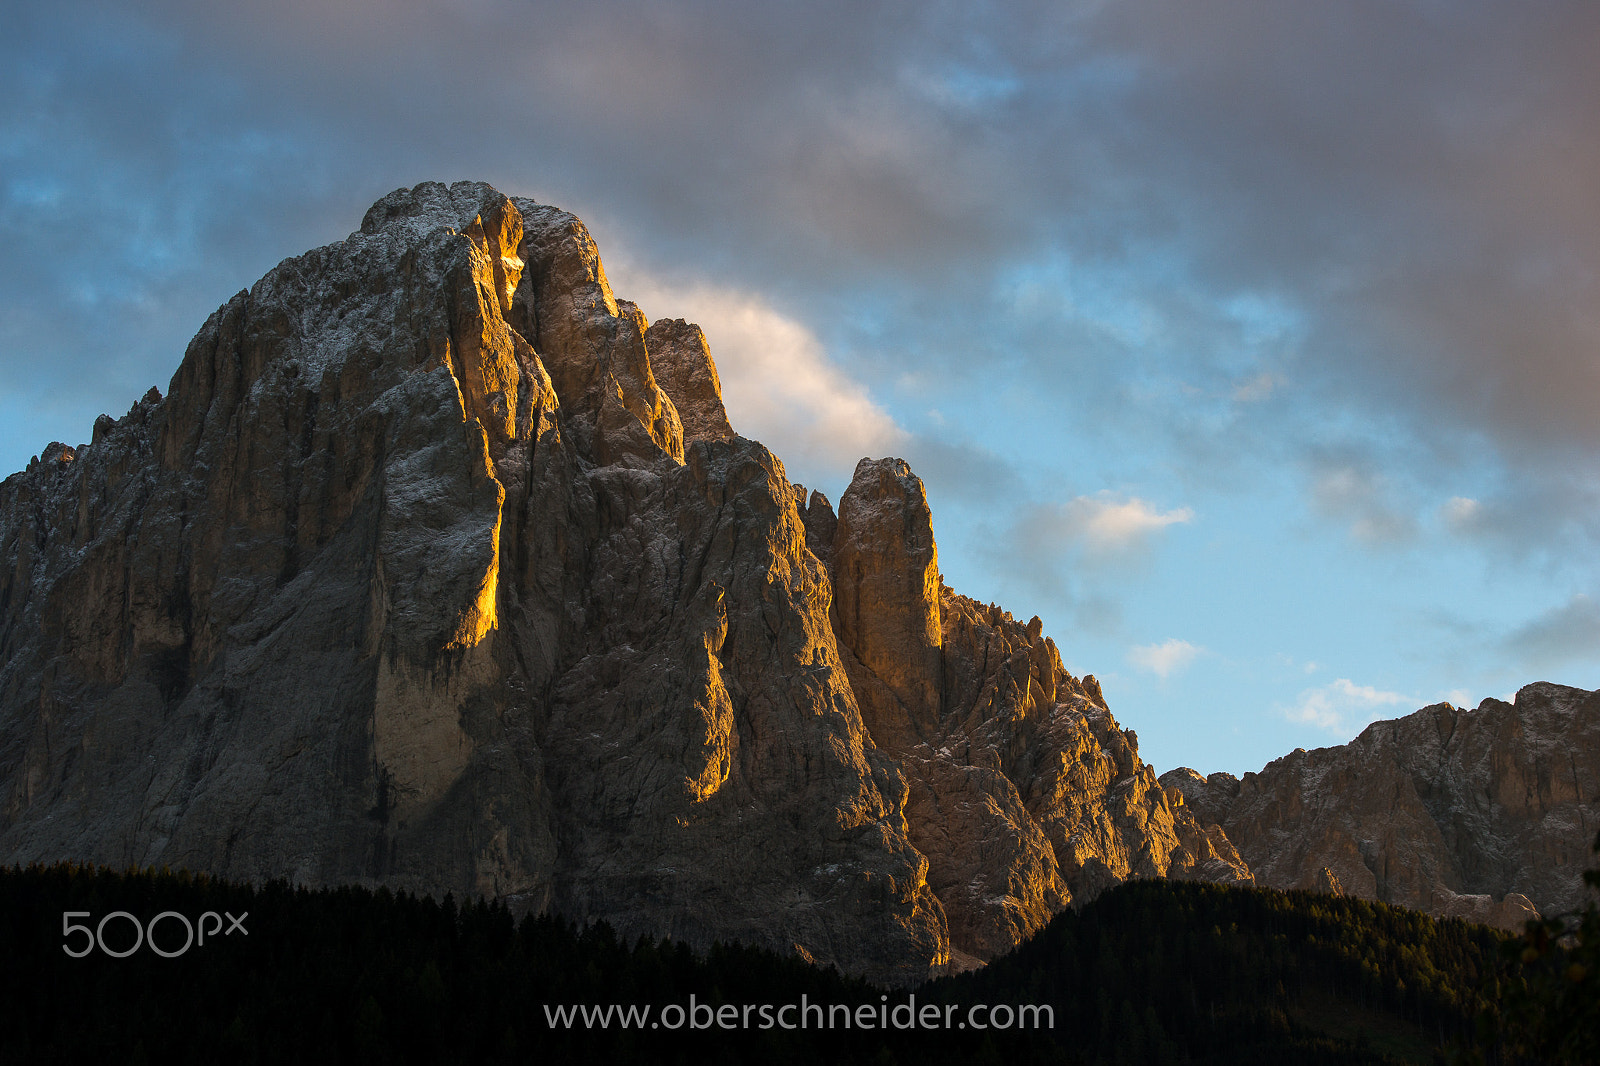 Sony a99 II sample photo. Sassolungo / langkofel in the last light of the day photography